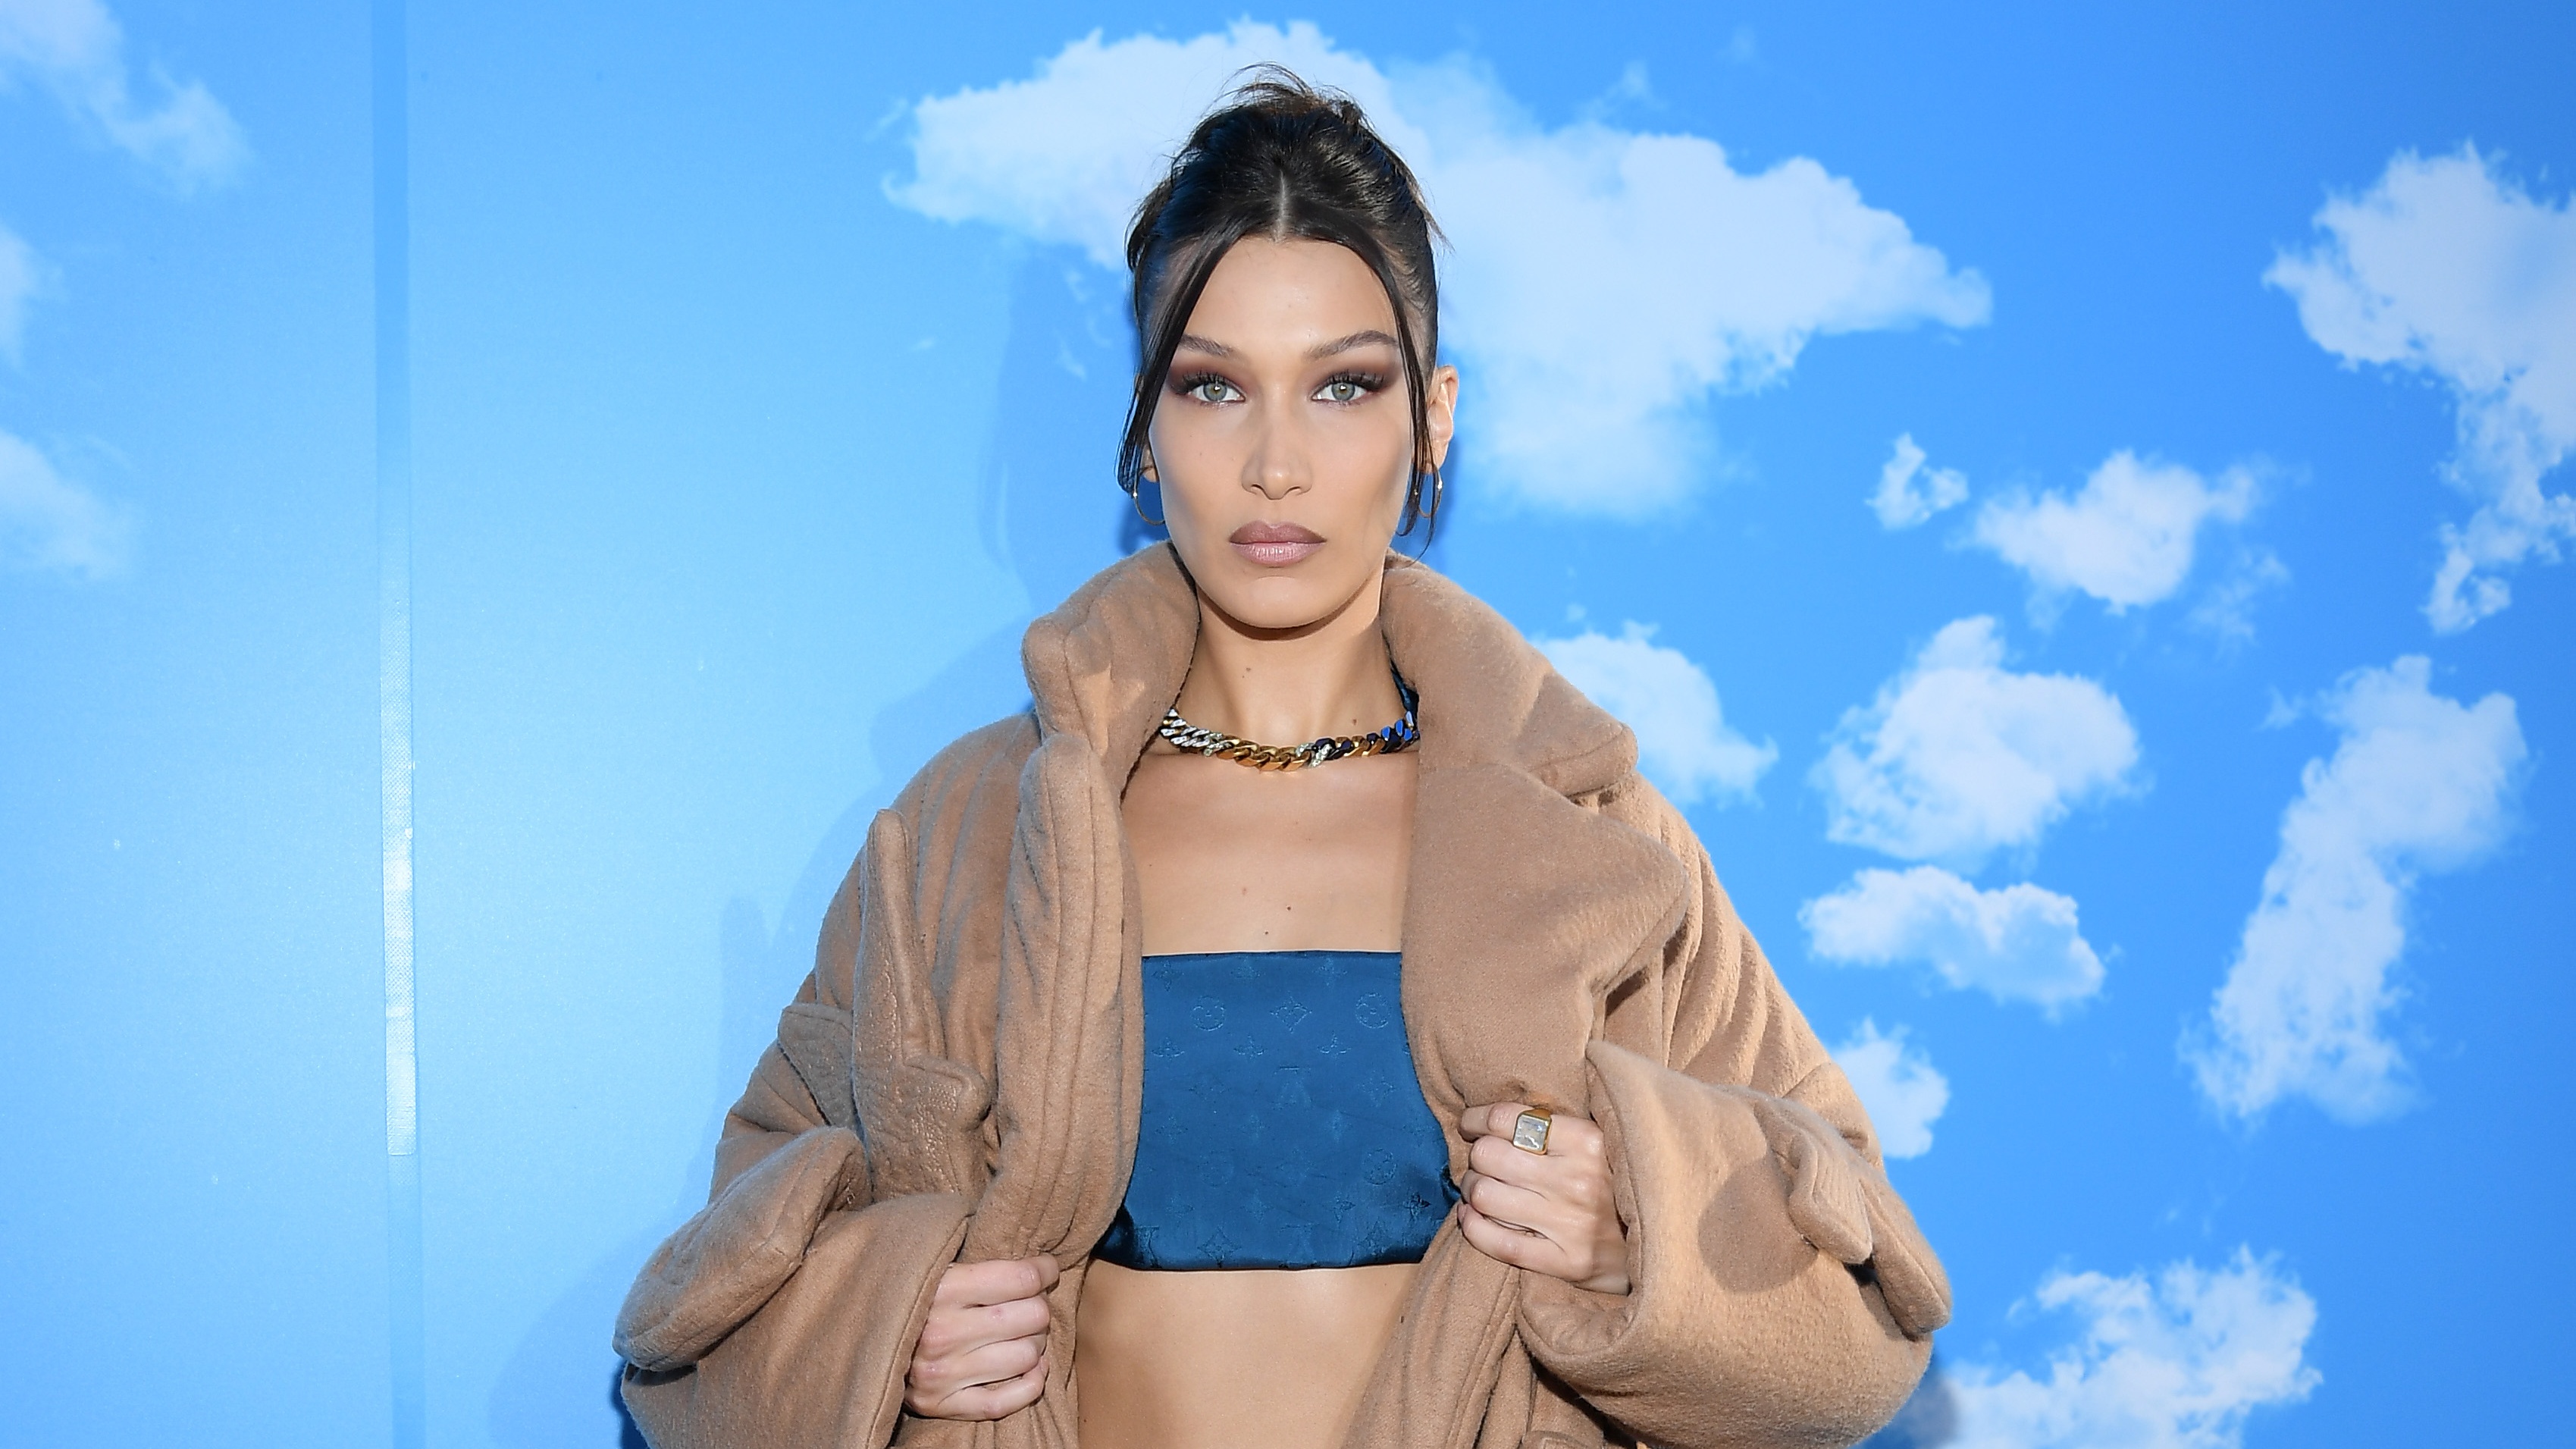 Louis Vuitton Heads to Texas, Bella Hadid Is the World's Most